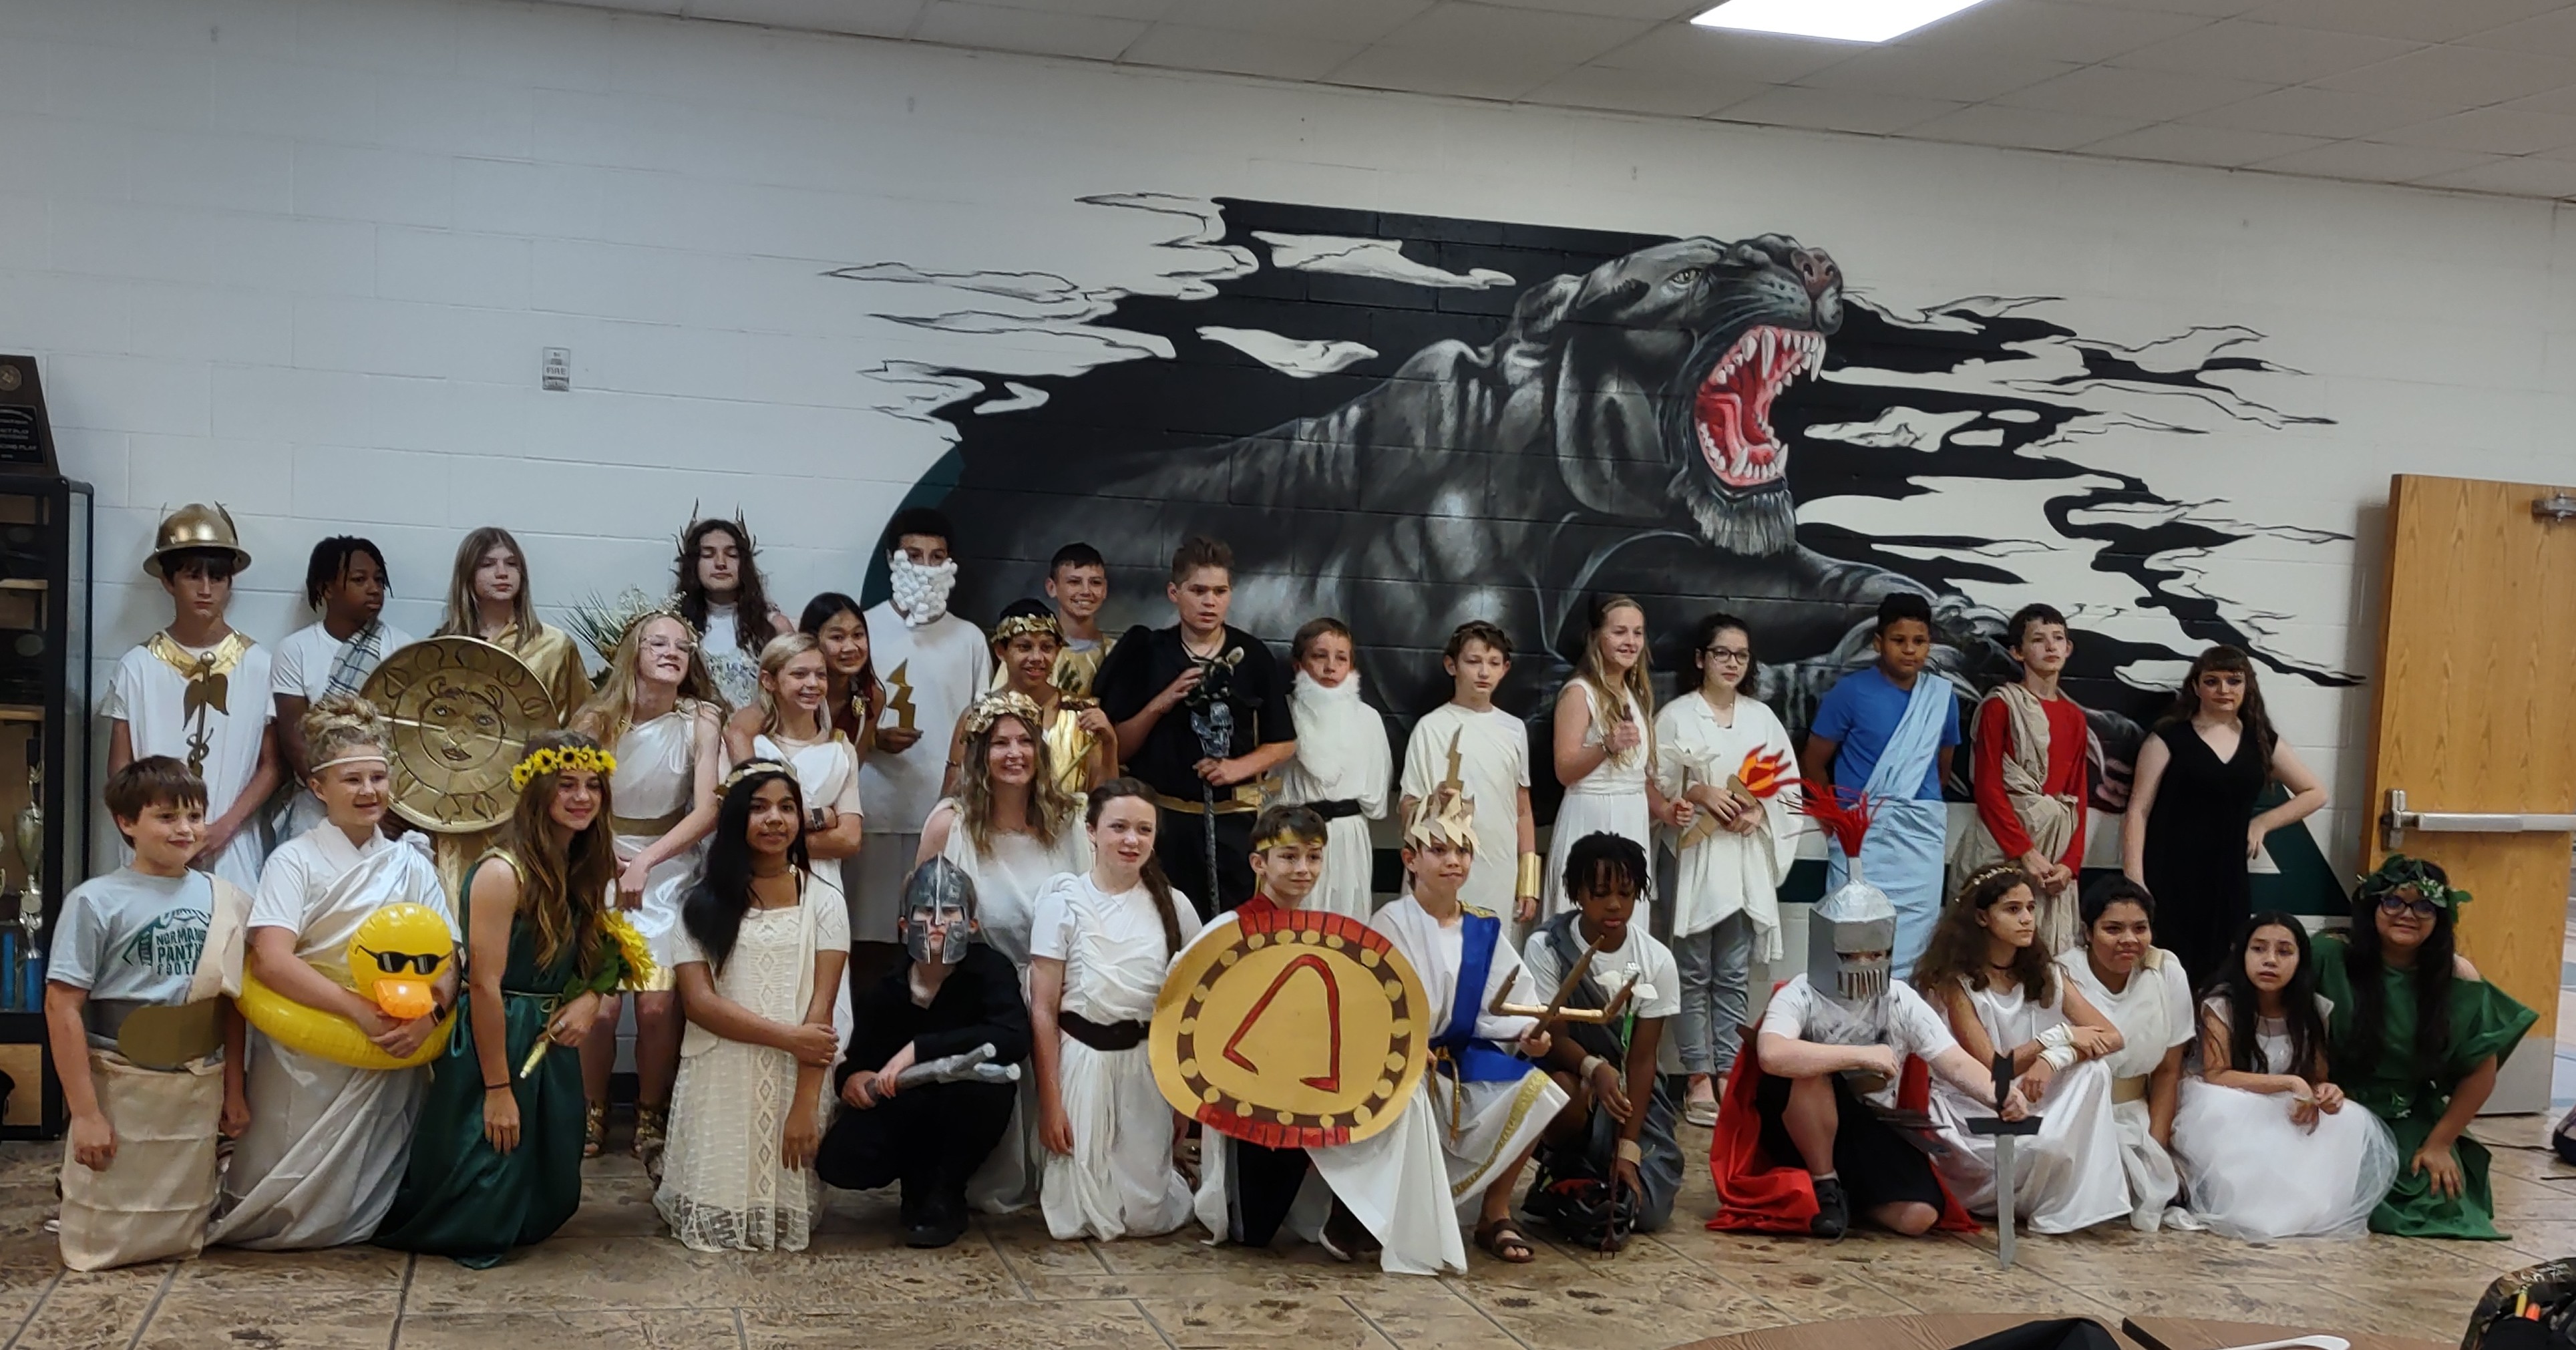 Our 6th Grade God and Goddess, these students did a great job!